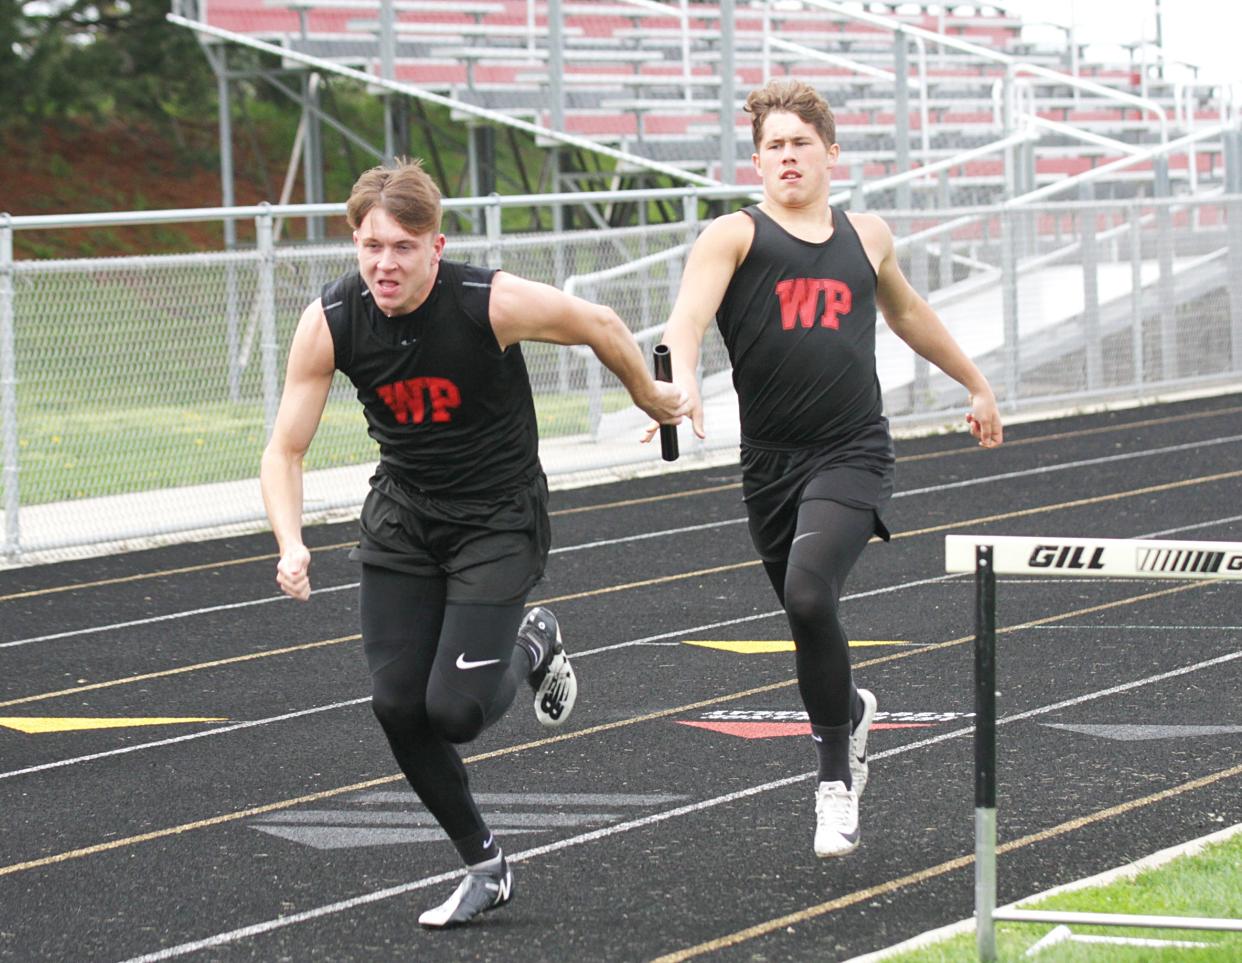 Dylan Carper hands the baton off to Todd Hollingsworth in the 800 relay for White Pigeon on Wednesday.